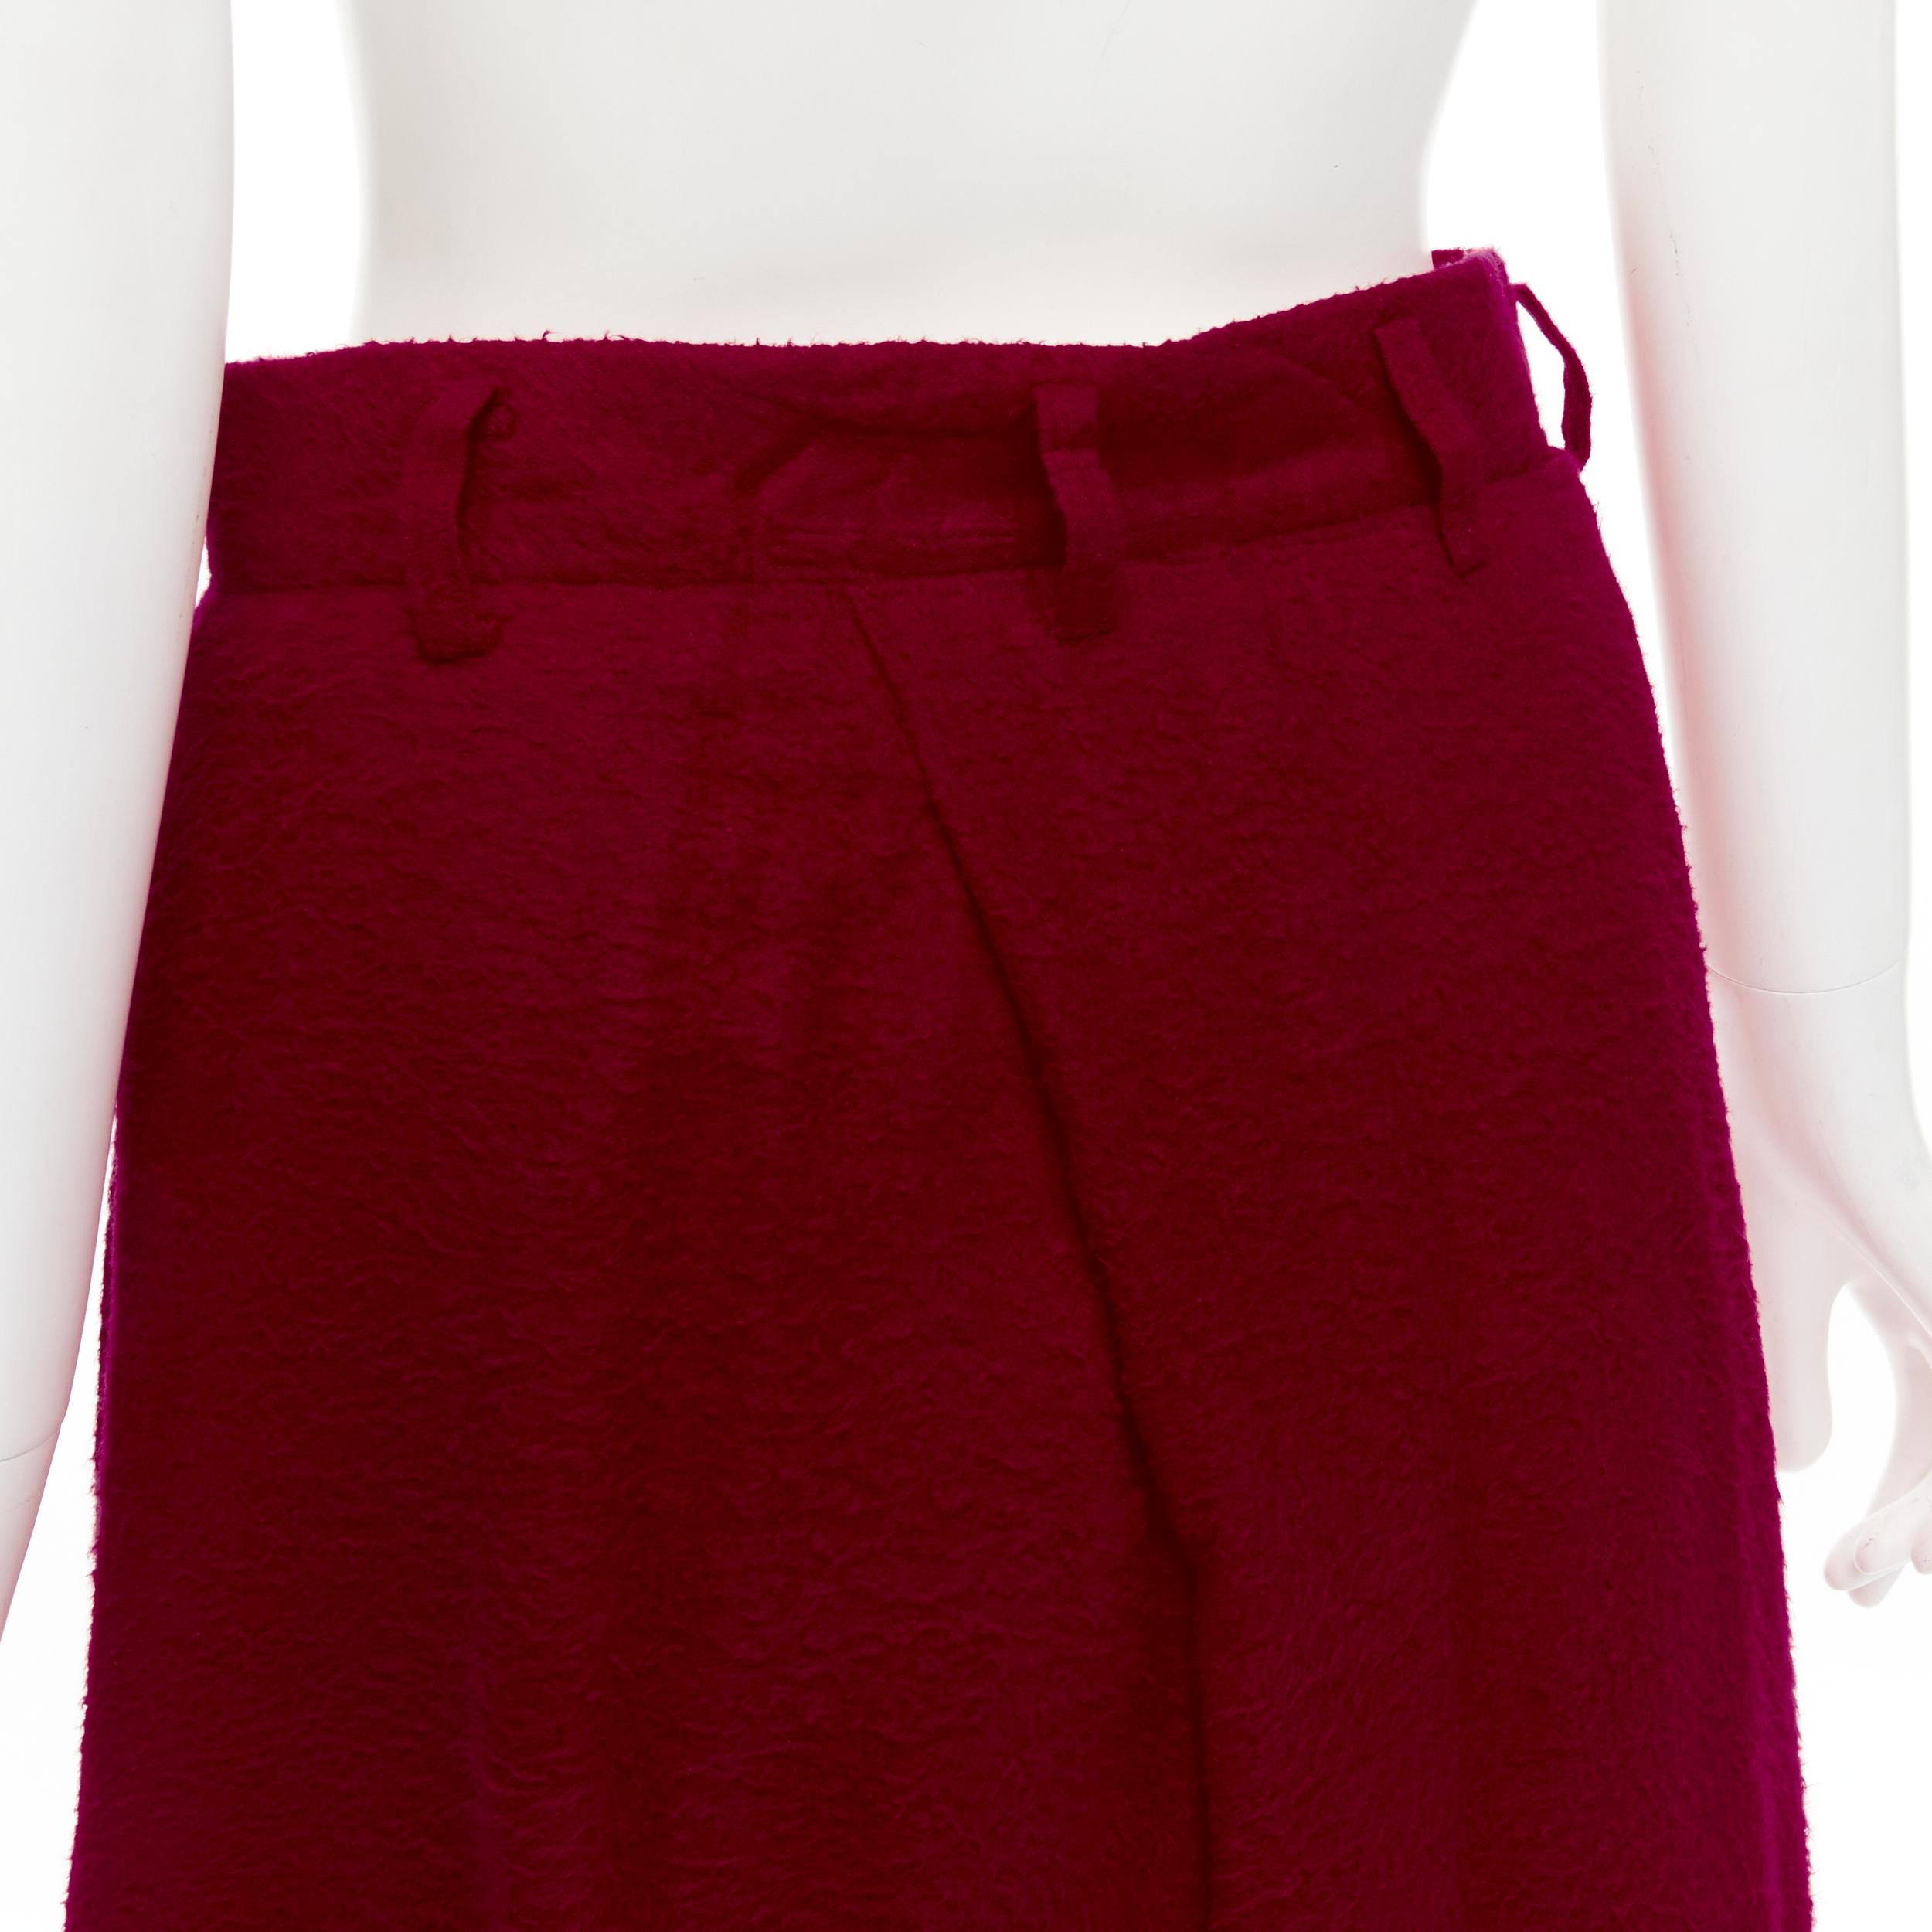 COMME DES GARCONS 1994 red boiled wool diagonal pleat draped midi skirt S 
Reference: CRTI/A00494 
Brand: Comme Des Garcons 
Collection: 1994 
Material: Wool 
Color: Red 
Pattern: Solid 
Closure: Zip 
Extra Detail: Belt loop detail. Zip fly. Pleat